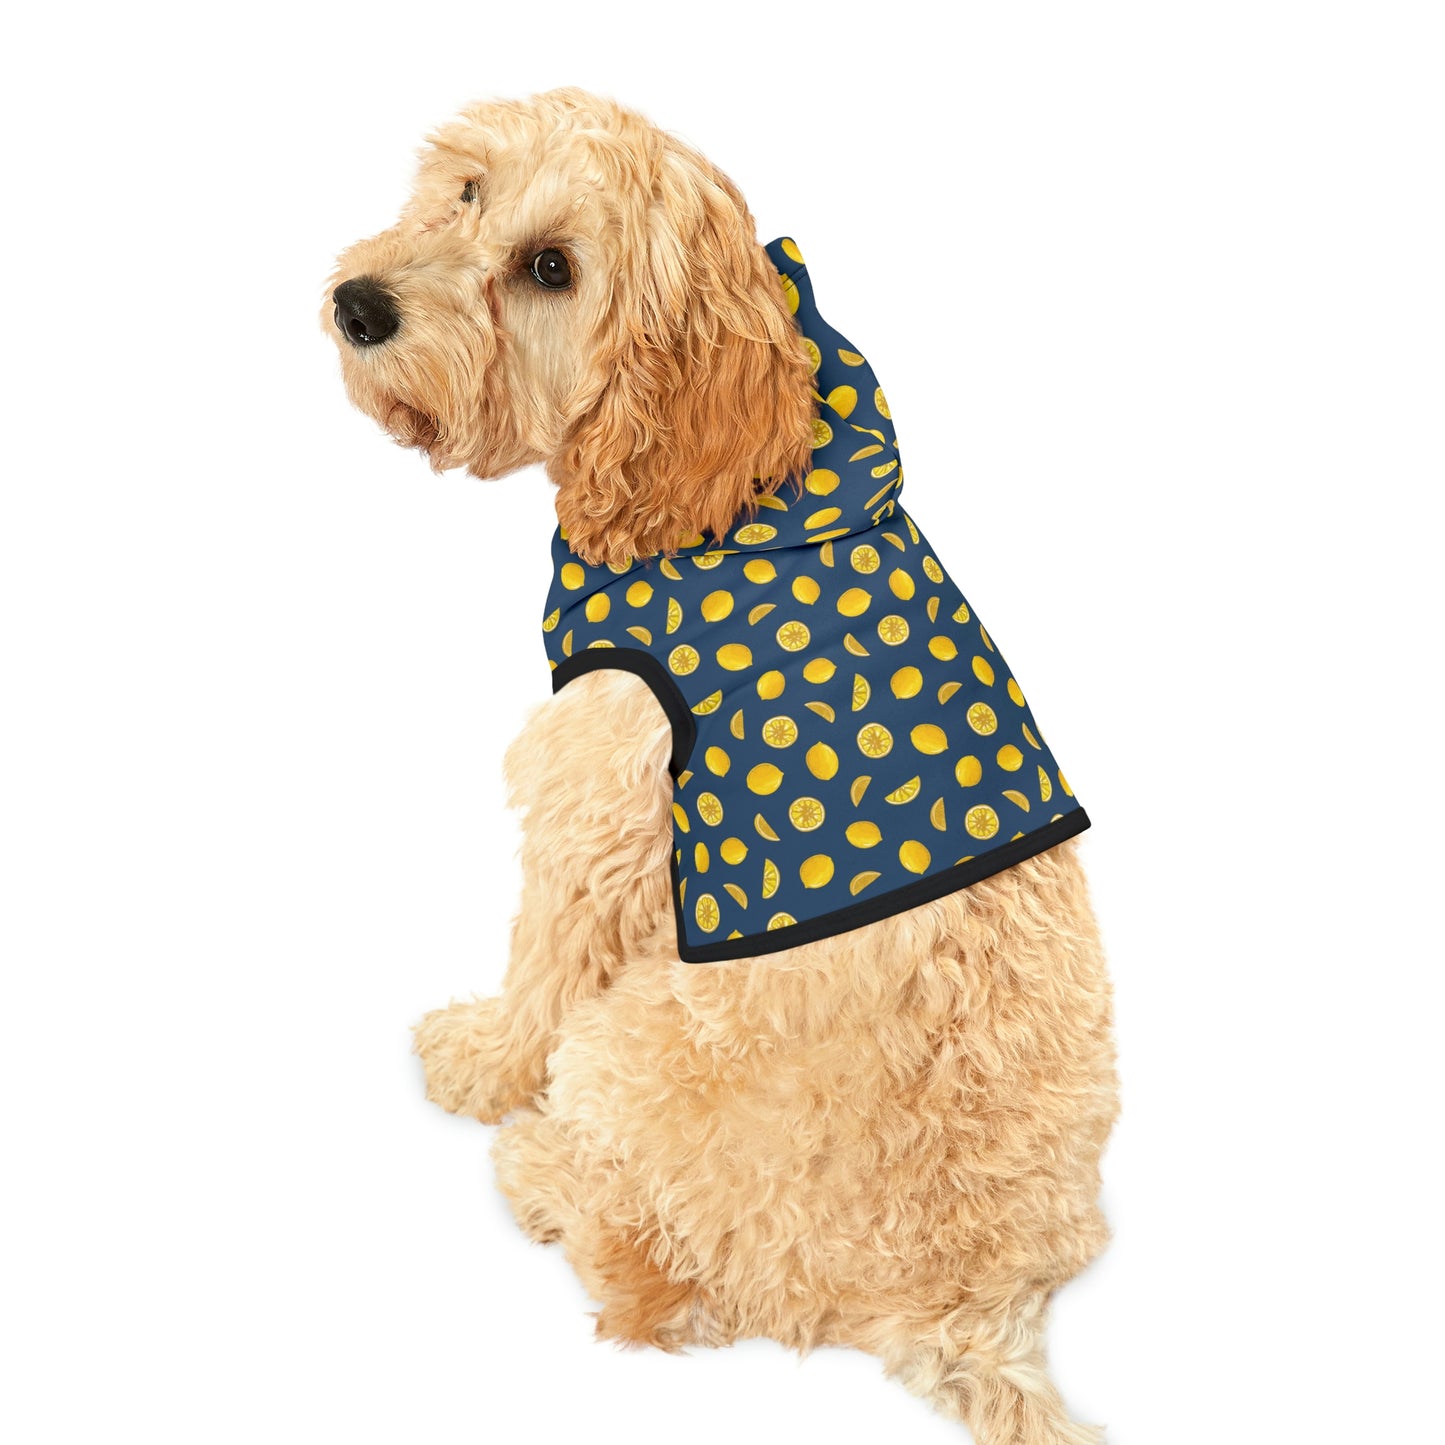 When Life Gives You Lemons - Doggie Hoodie